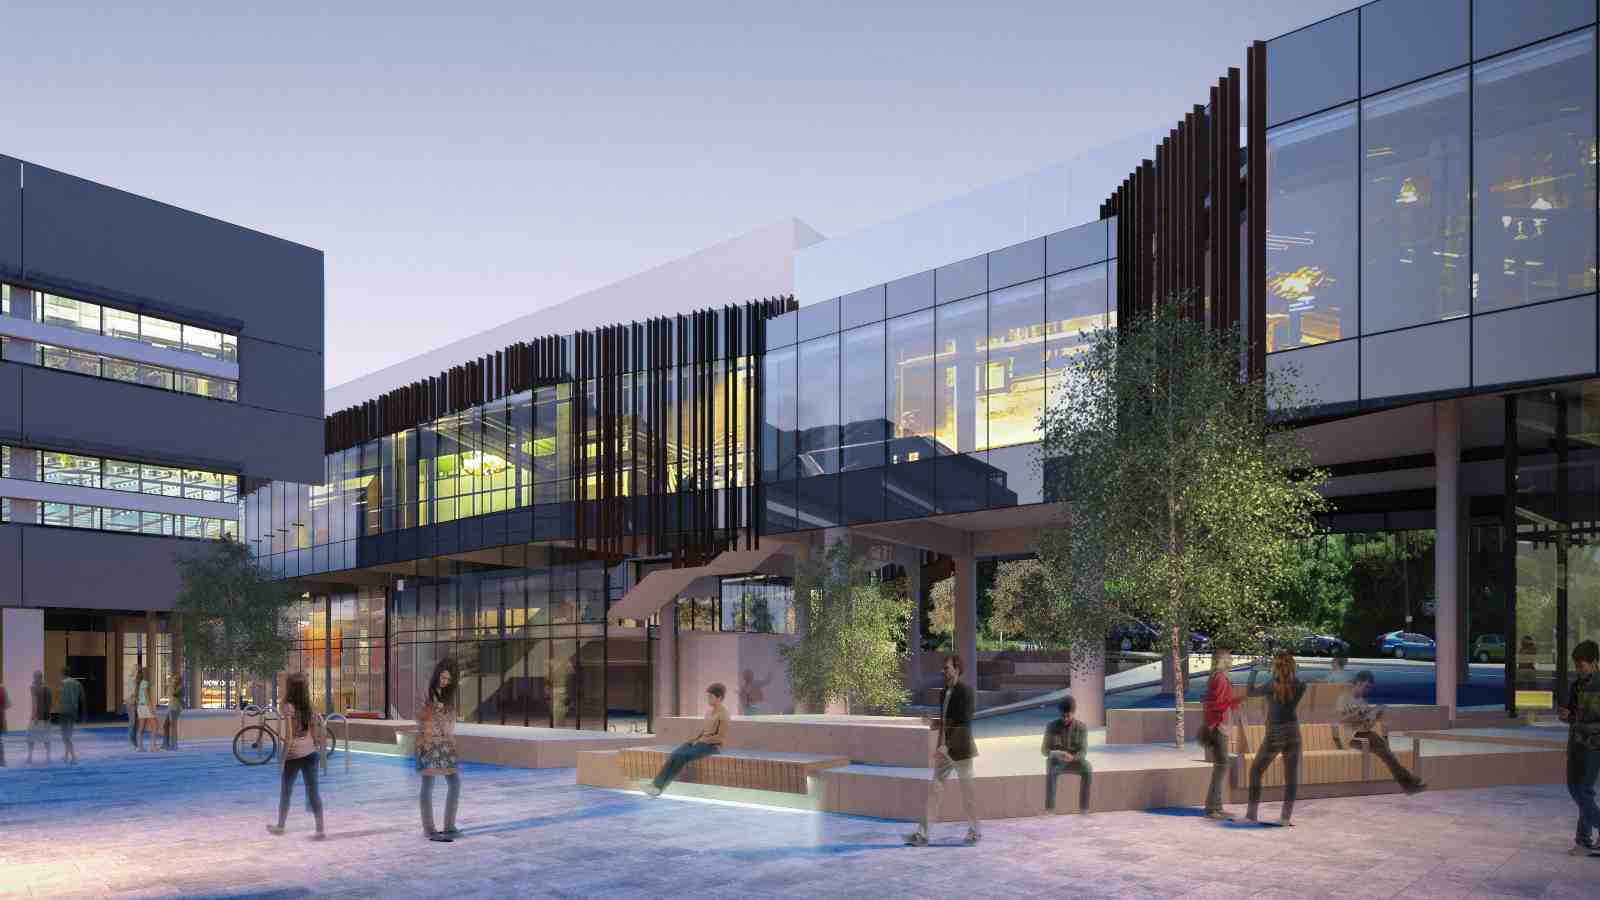 Artist’s impression of the exterior of the proposed new science building.